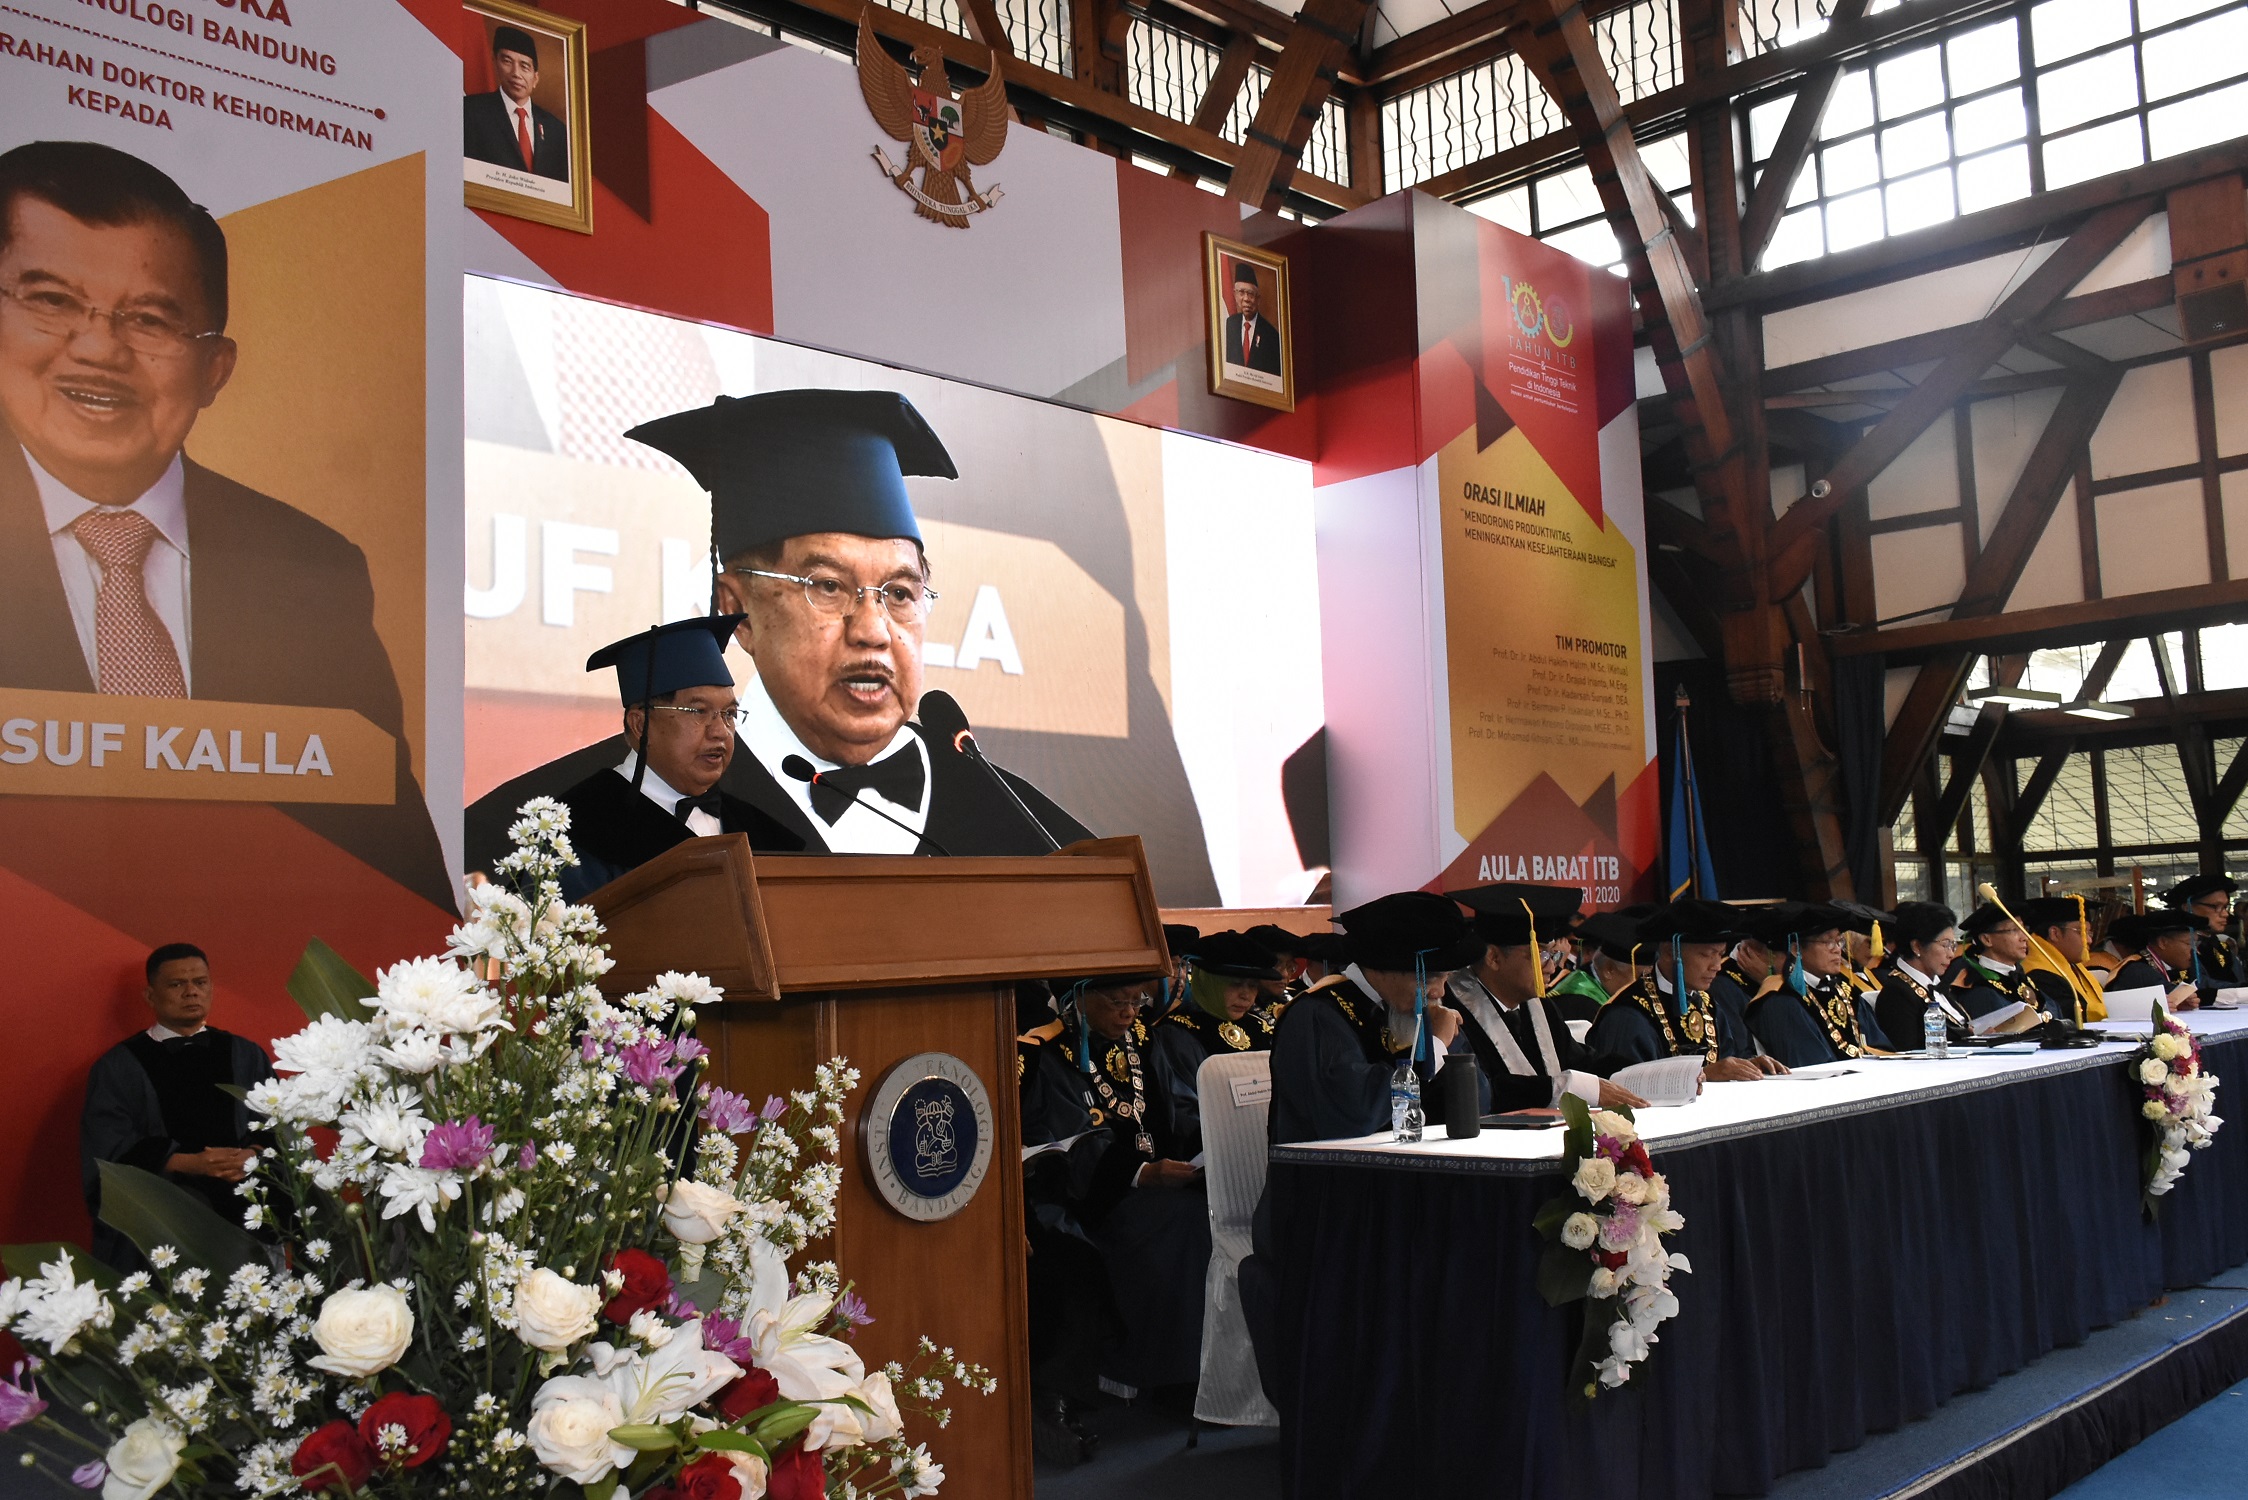 itb-confers-honorary-doctor-degree-to-m-jusuf-kalla